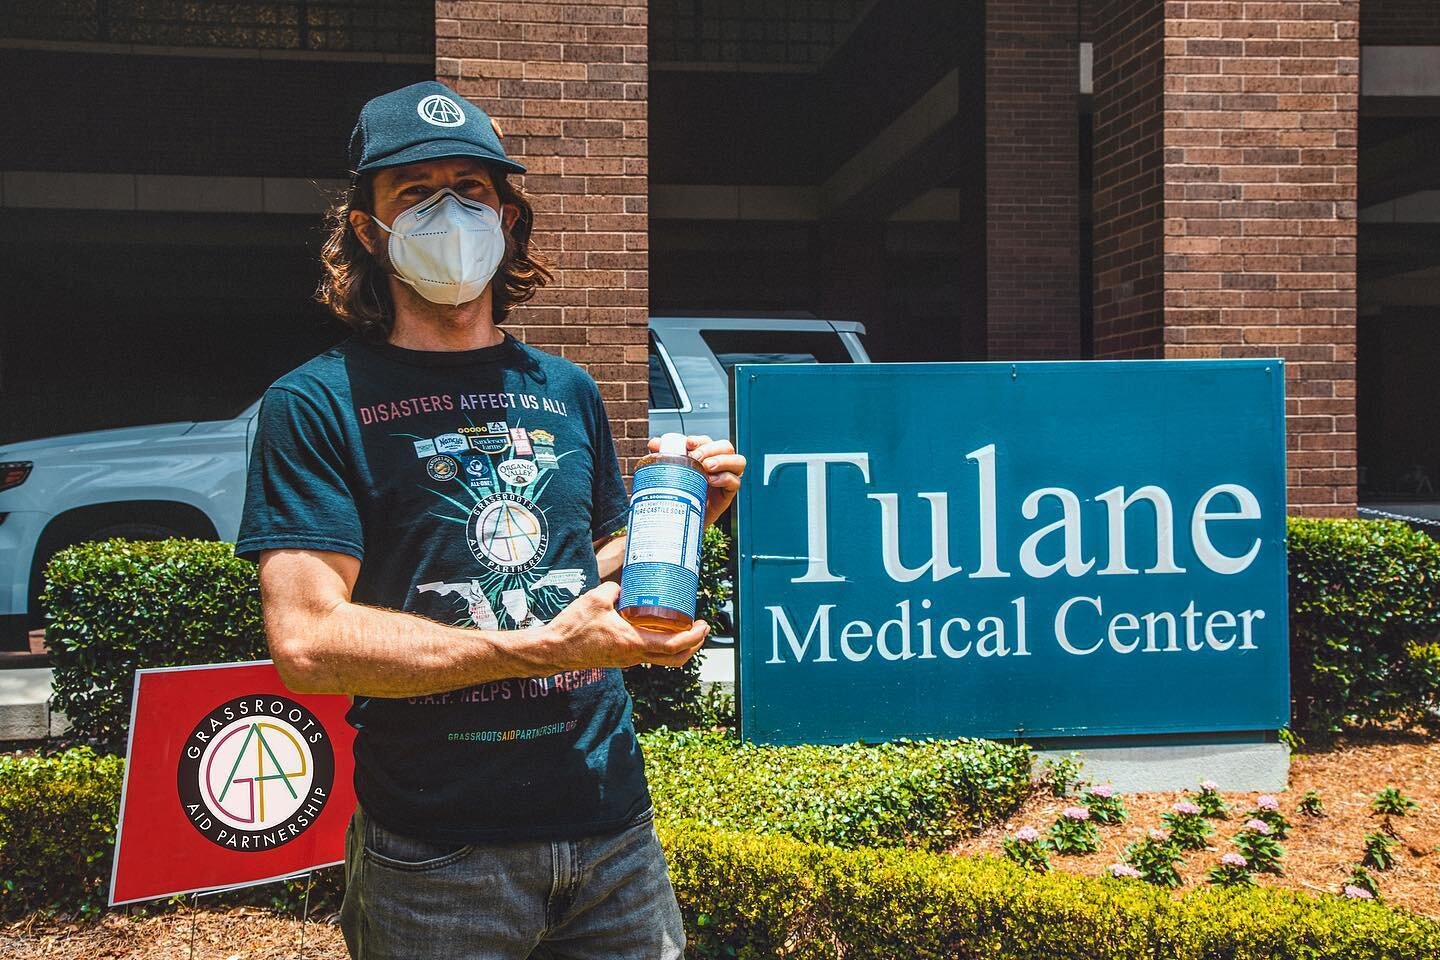 Our Executive director delivering In person  2k of @drbronner Magic Soaps delivered to Tulane Medical Center in New Orleans! .
.
.
.
.
#healtheearth #naturalskincare #naturalsoaps #candles #doctor #staycentered #physician #stethoscope #organic #energ